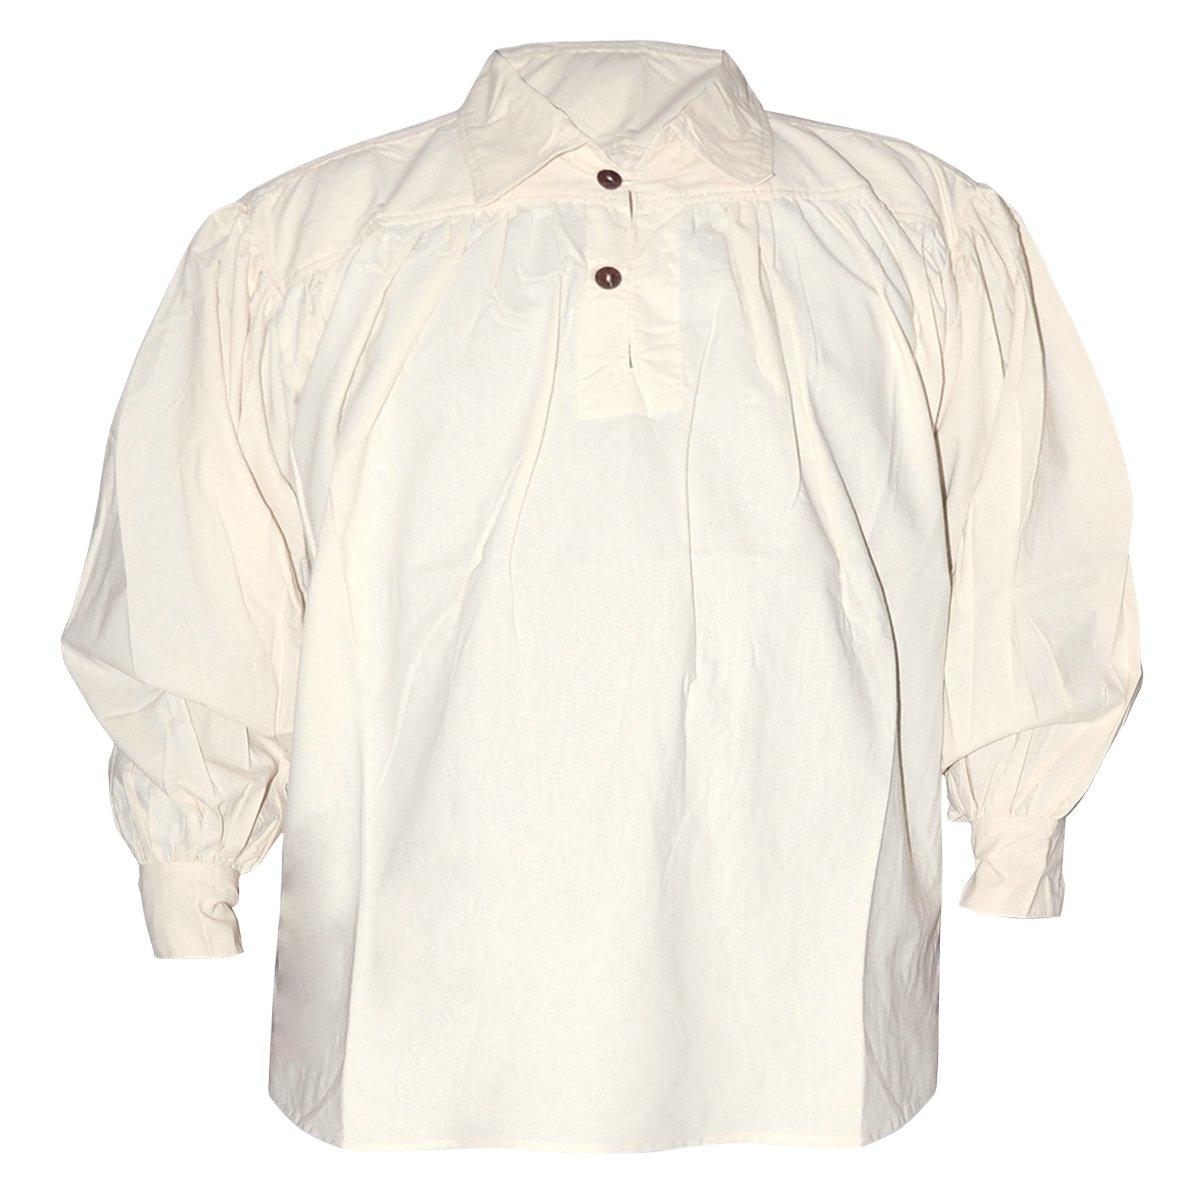 Cotton Shirt, Collared, Button Neck, Natural, Size L